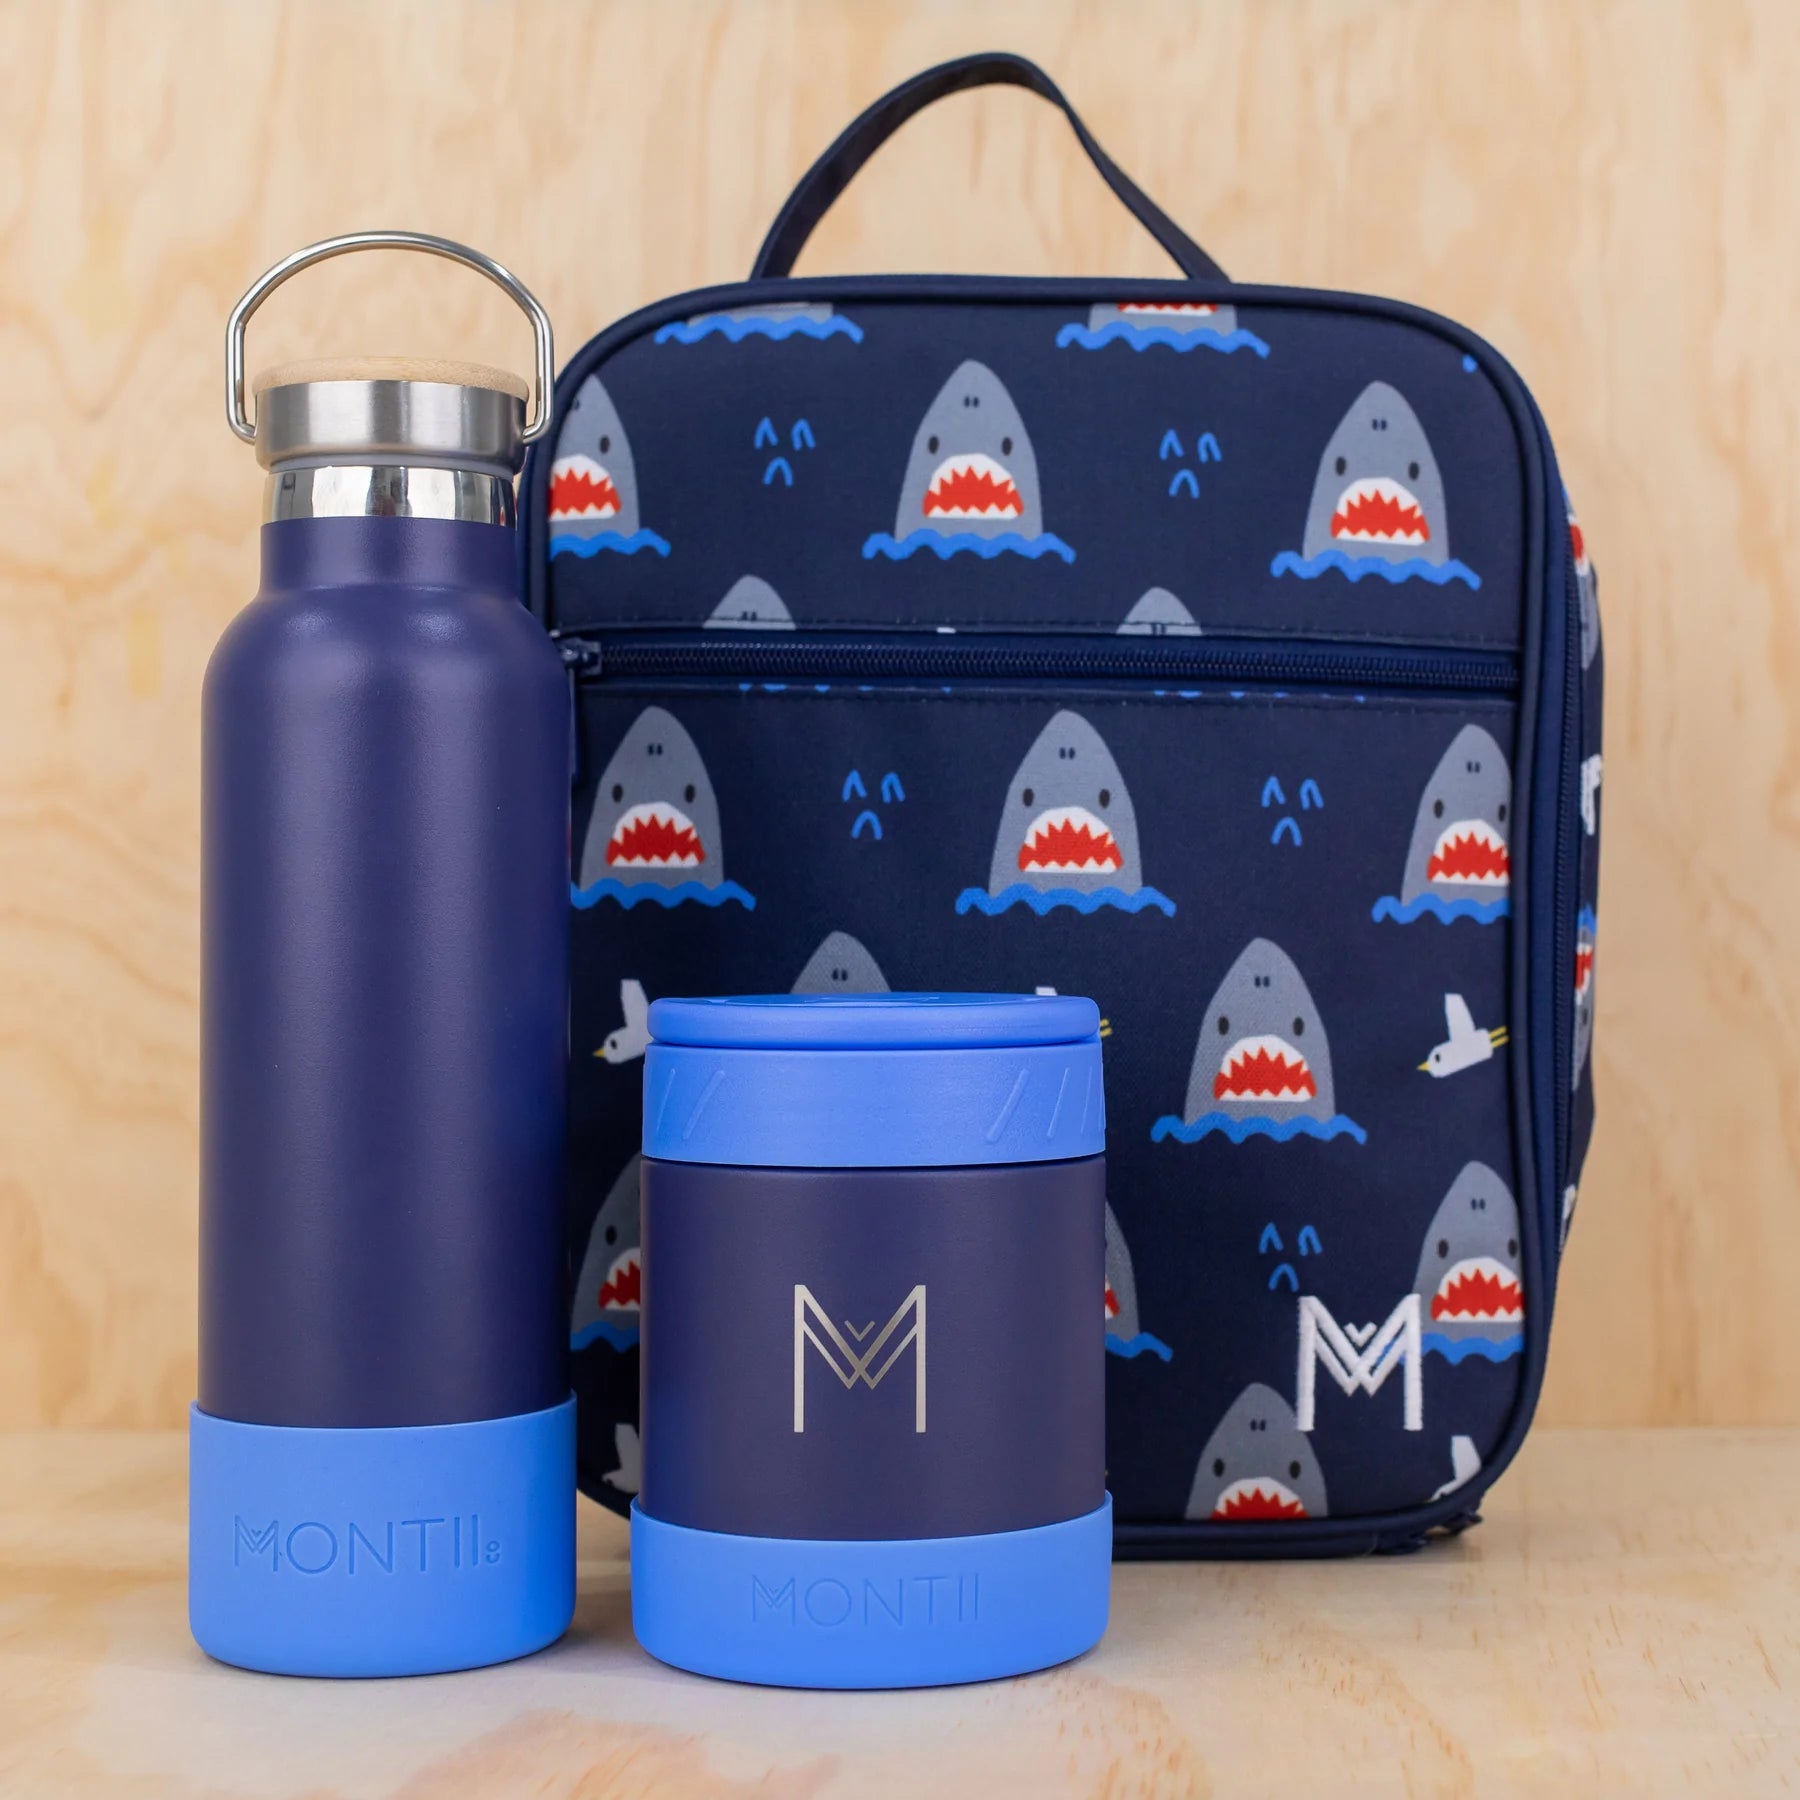 MontiiCo Insulated Food Jar - Cobalt-The Living Co.